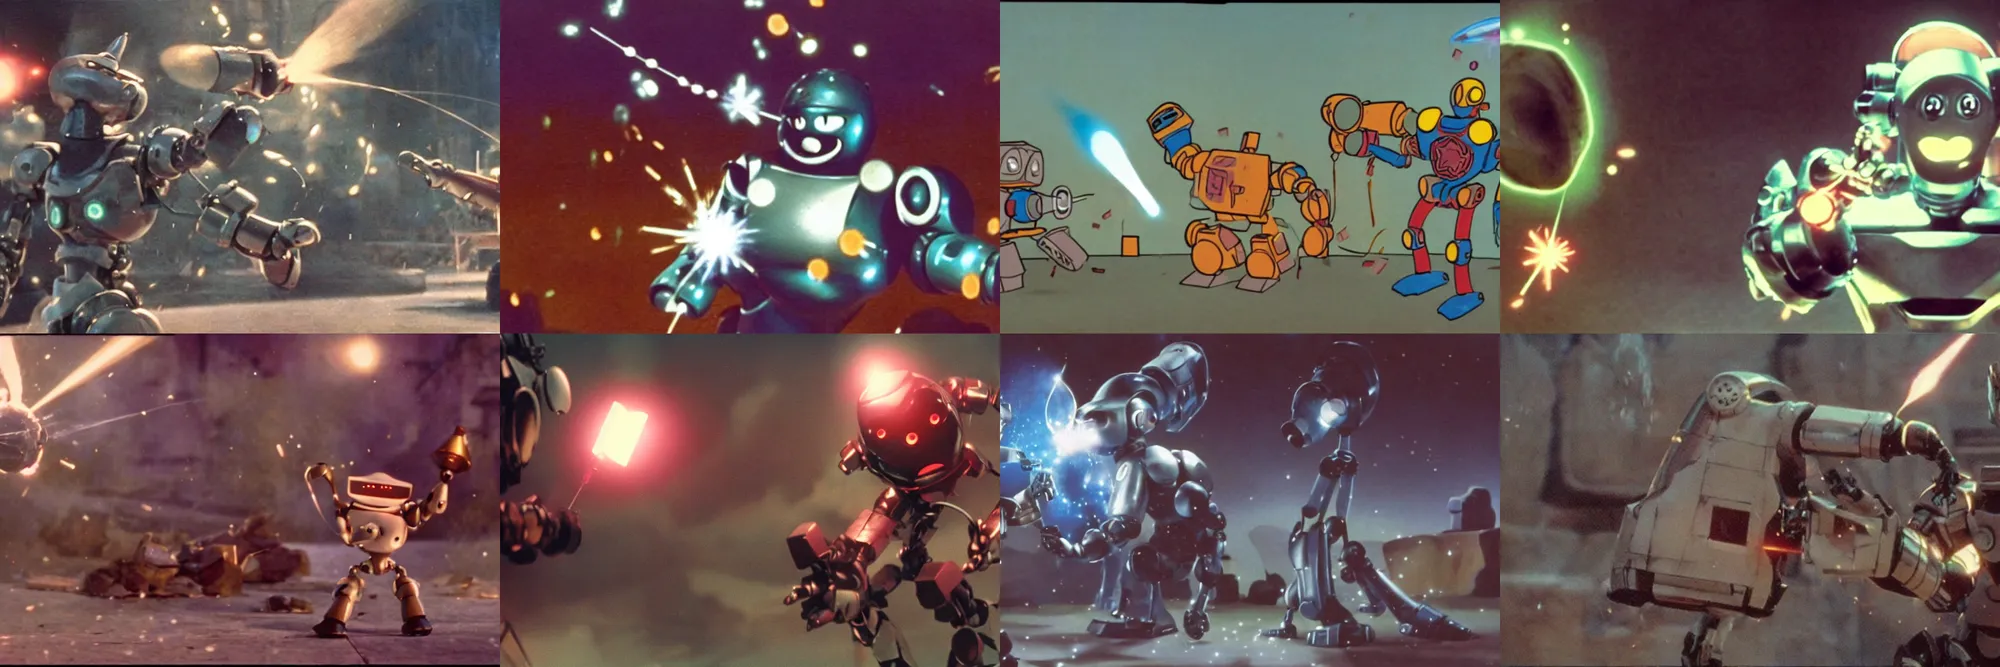 Prompt: a magical fantasy robot is spitting projectiles from his mouth, film still from an cartoon, action scene